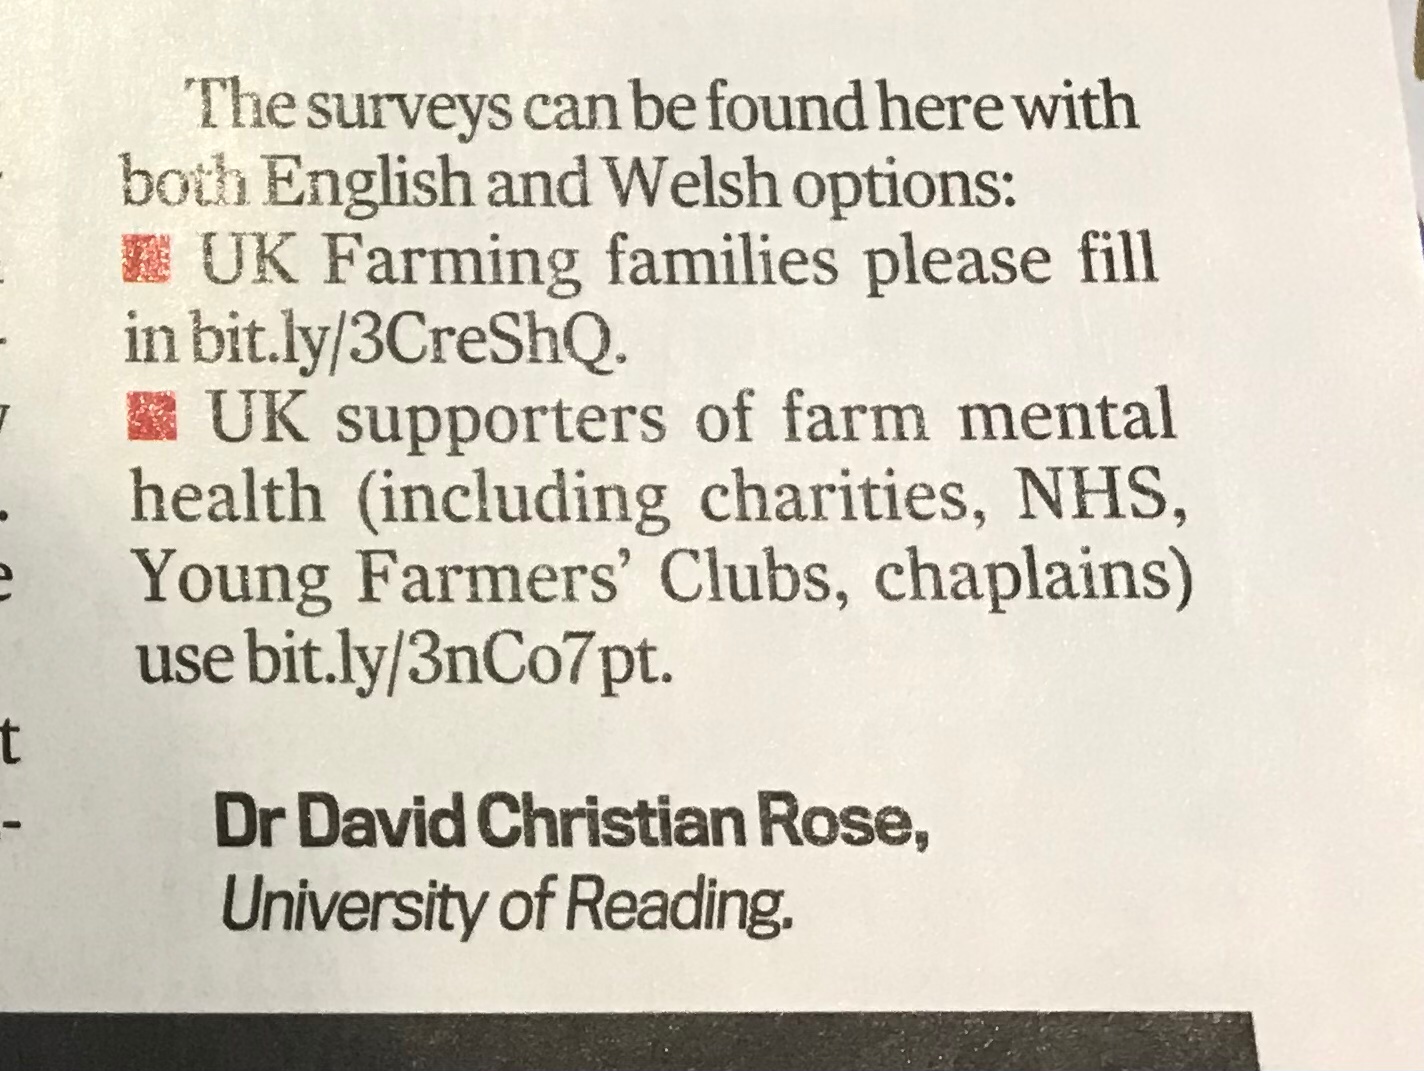 Letter published in Farmers Guardian